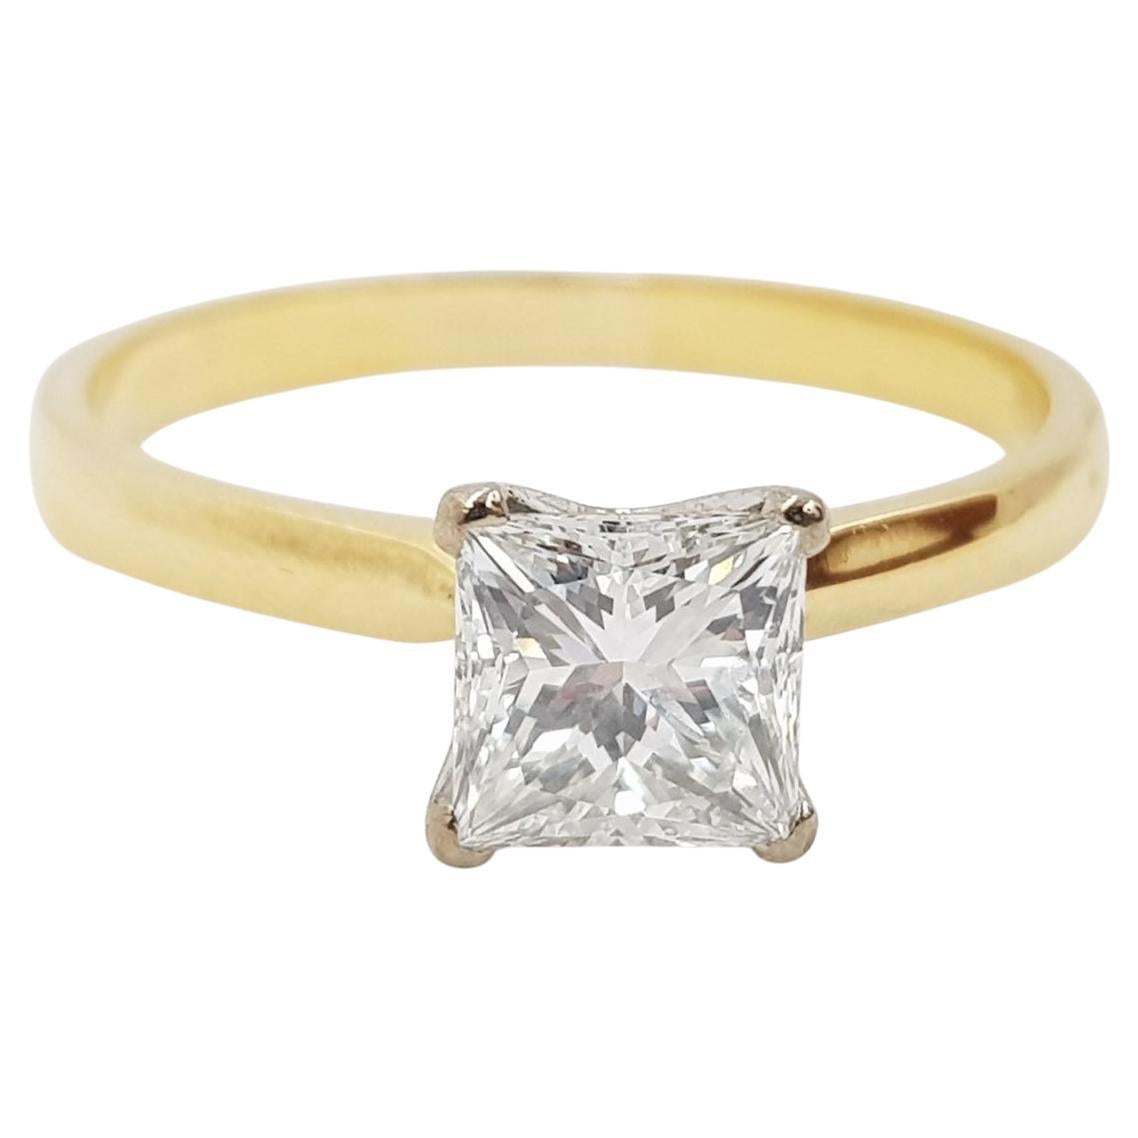 18ct Gold 1.23ct Princess Cut Solitaire Diamond Ring GIA Certified For Sale